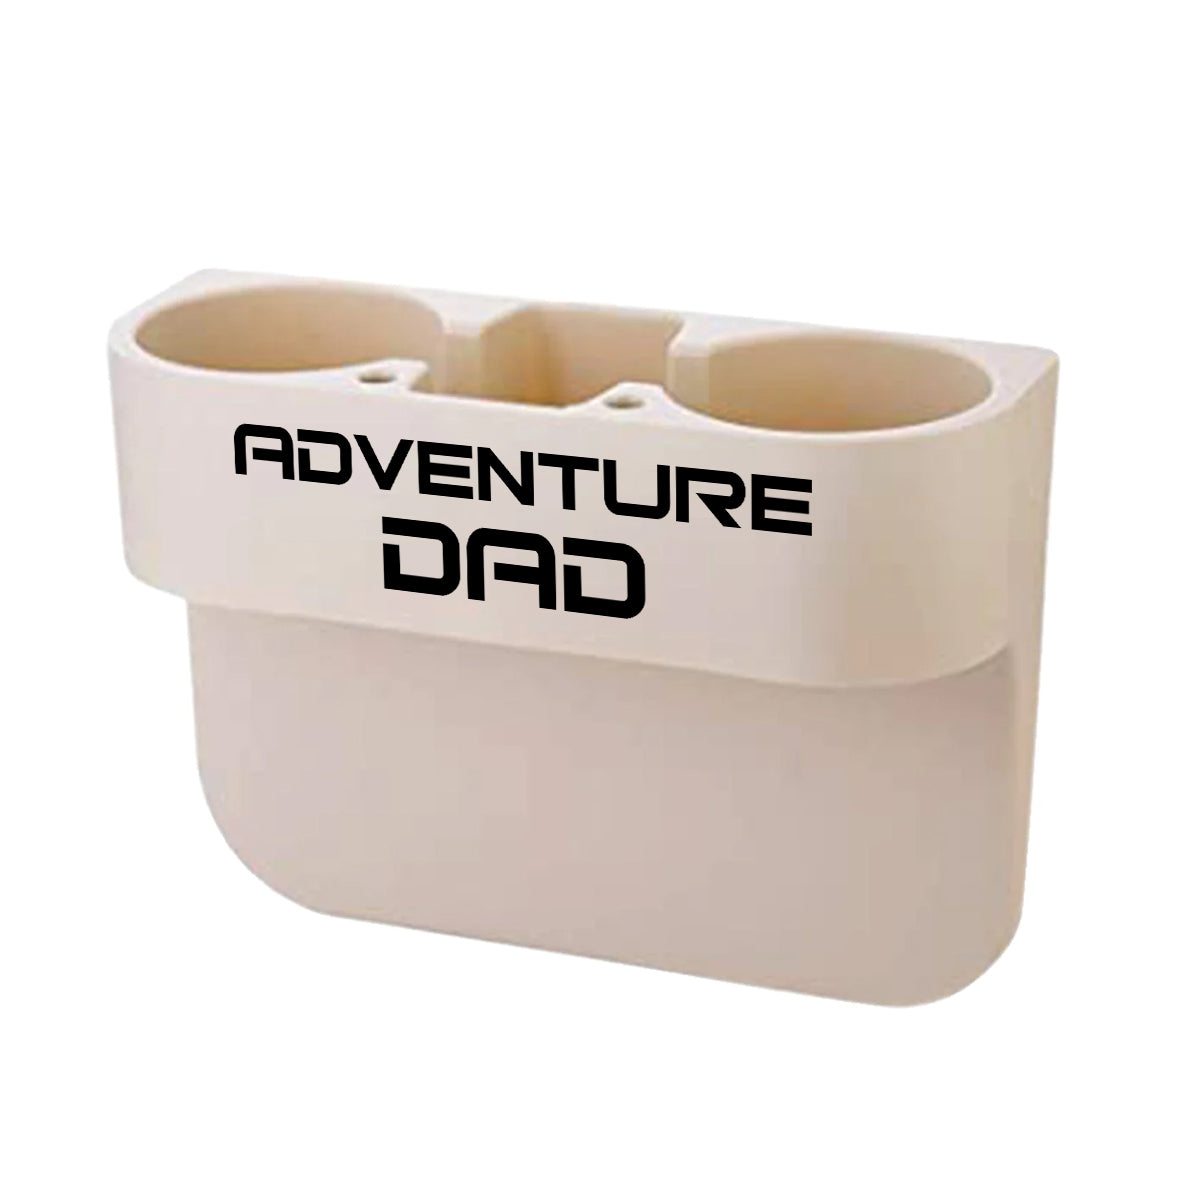 Cup Holder Portable Multifunction Vehicle Seat Cup Cell Phone Drinks Holder Box Car Interior Organizer,Happy Father' s Day, Adventure Dad, Custom For Your Cars, Car Accessories KX11995,Gift for Daddy 04